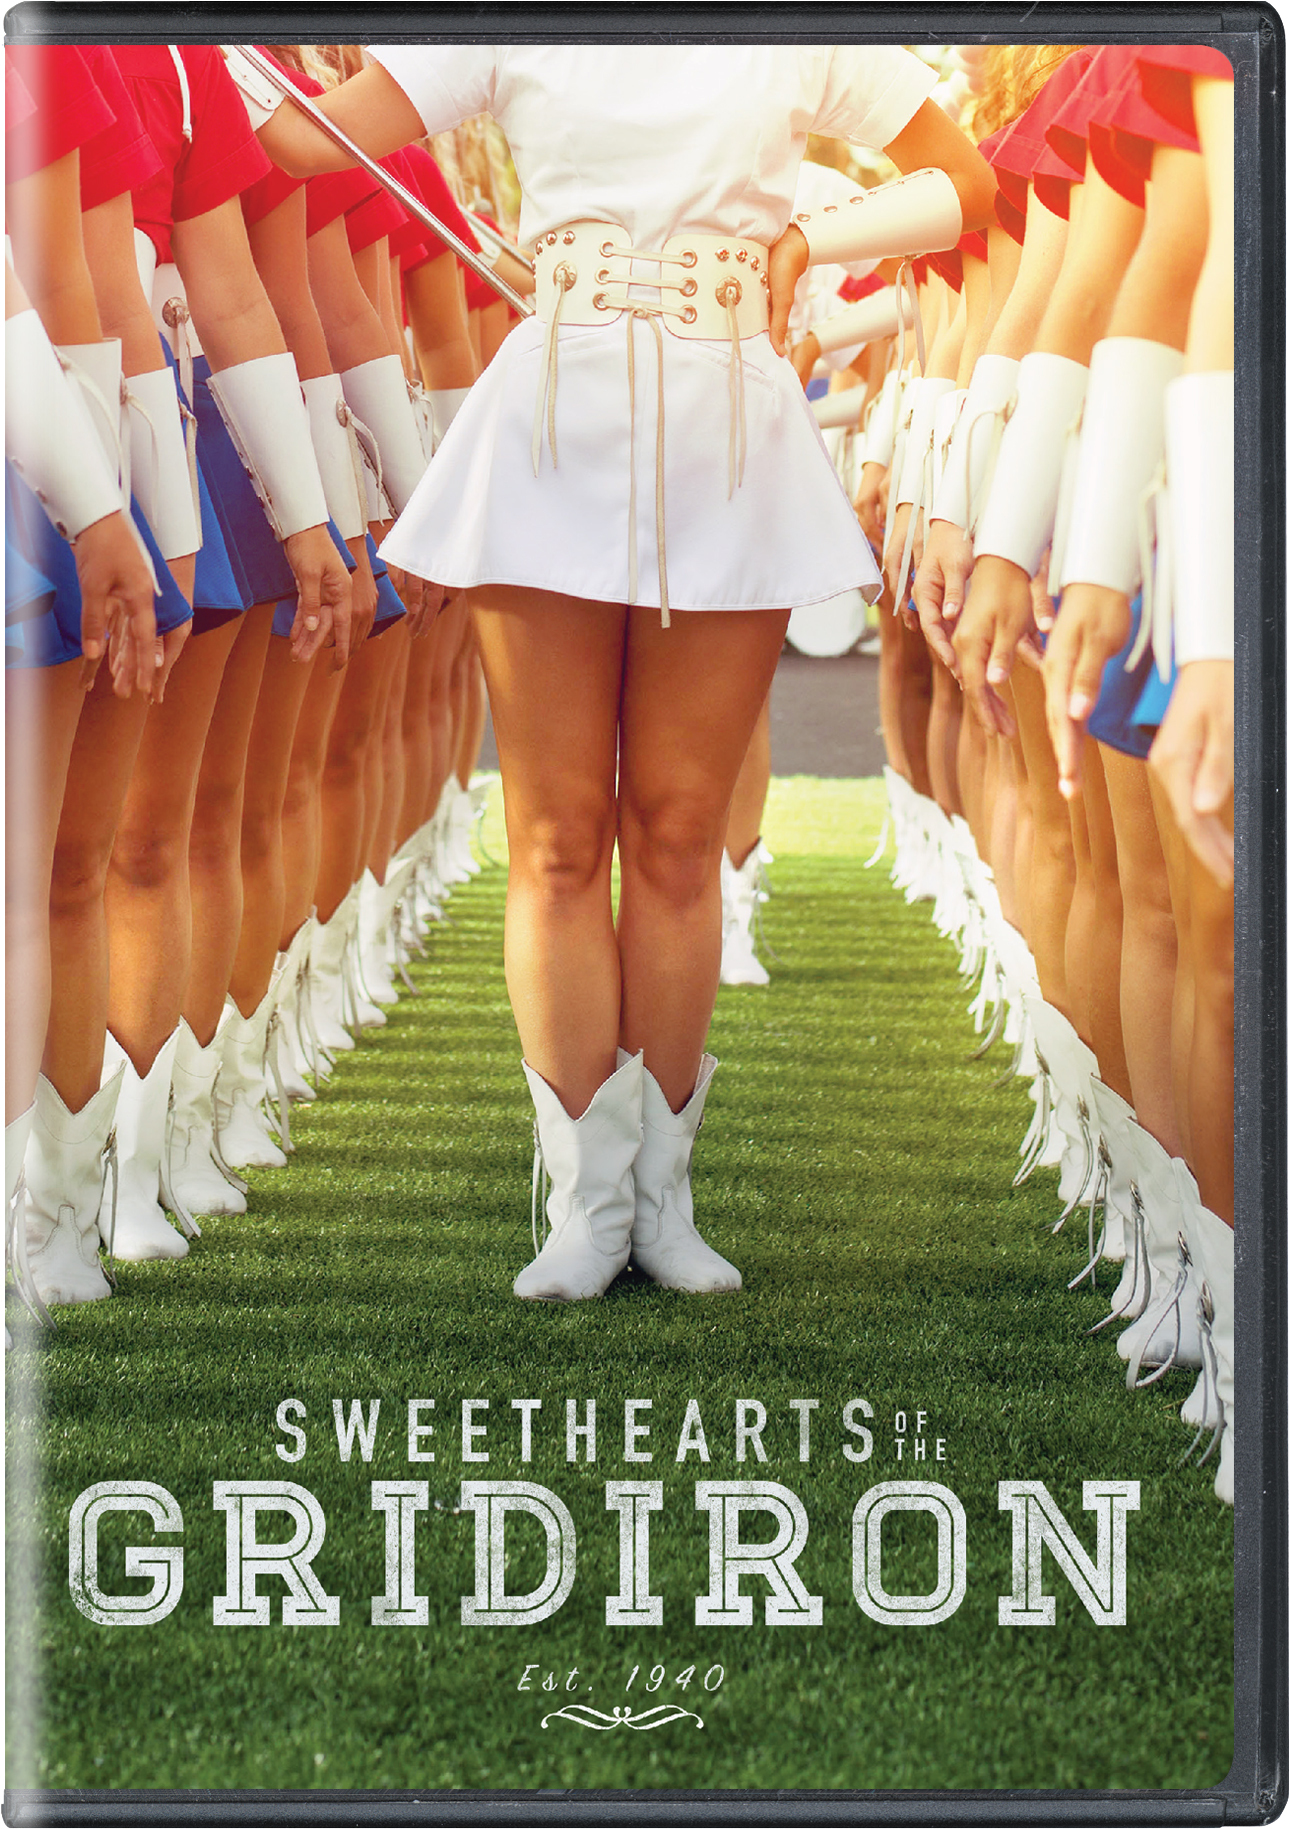 Sweethearts Of The Gridiron - DVD [ 2016 ]  - Documentaries On DVD